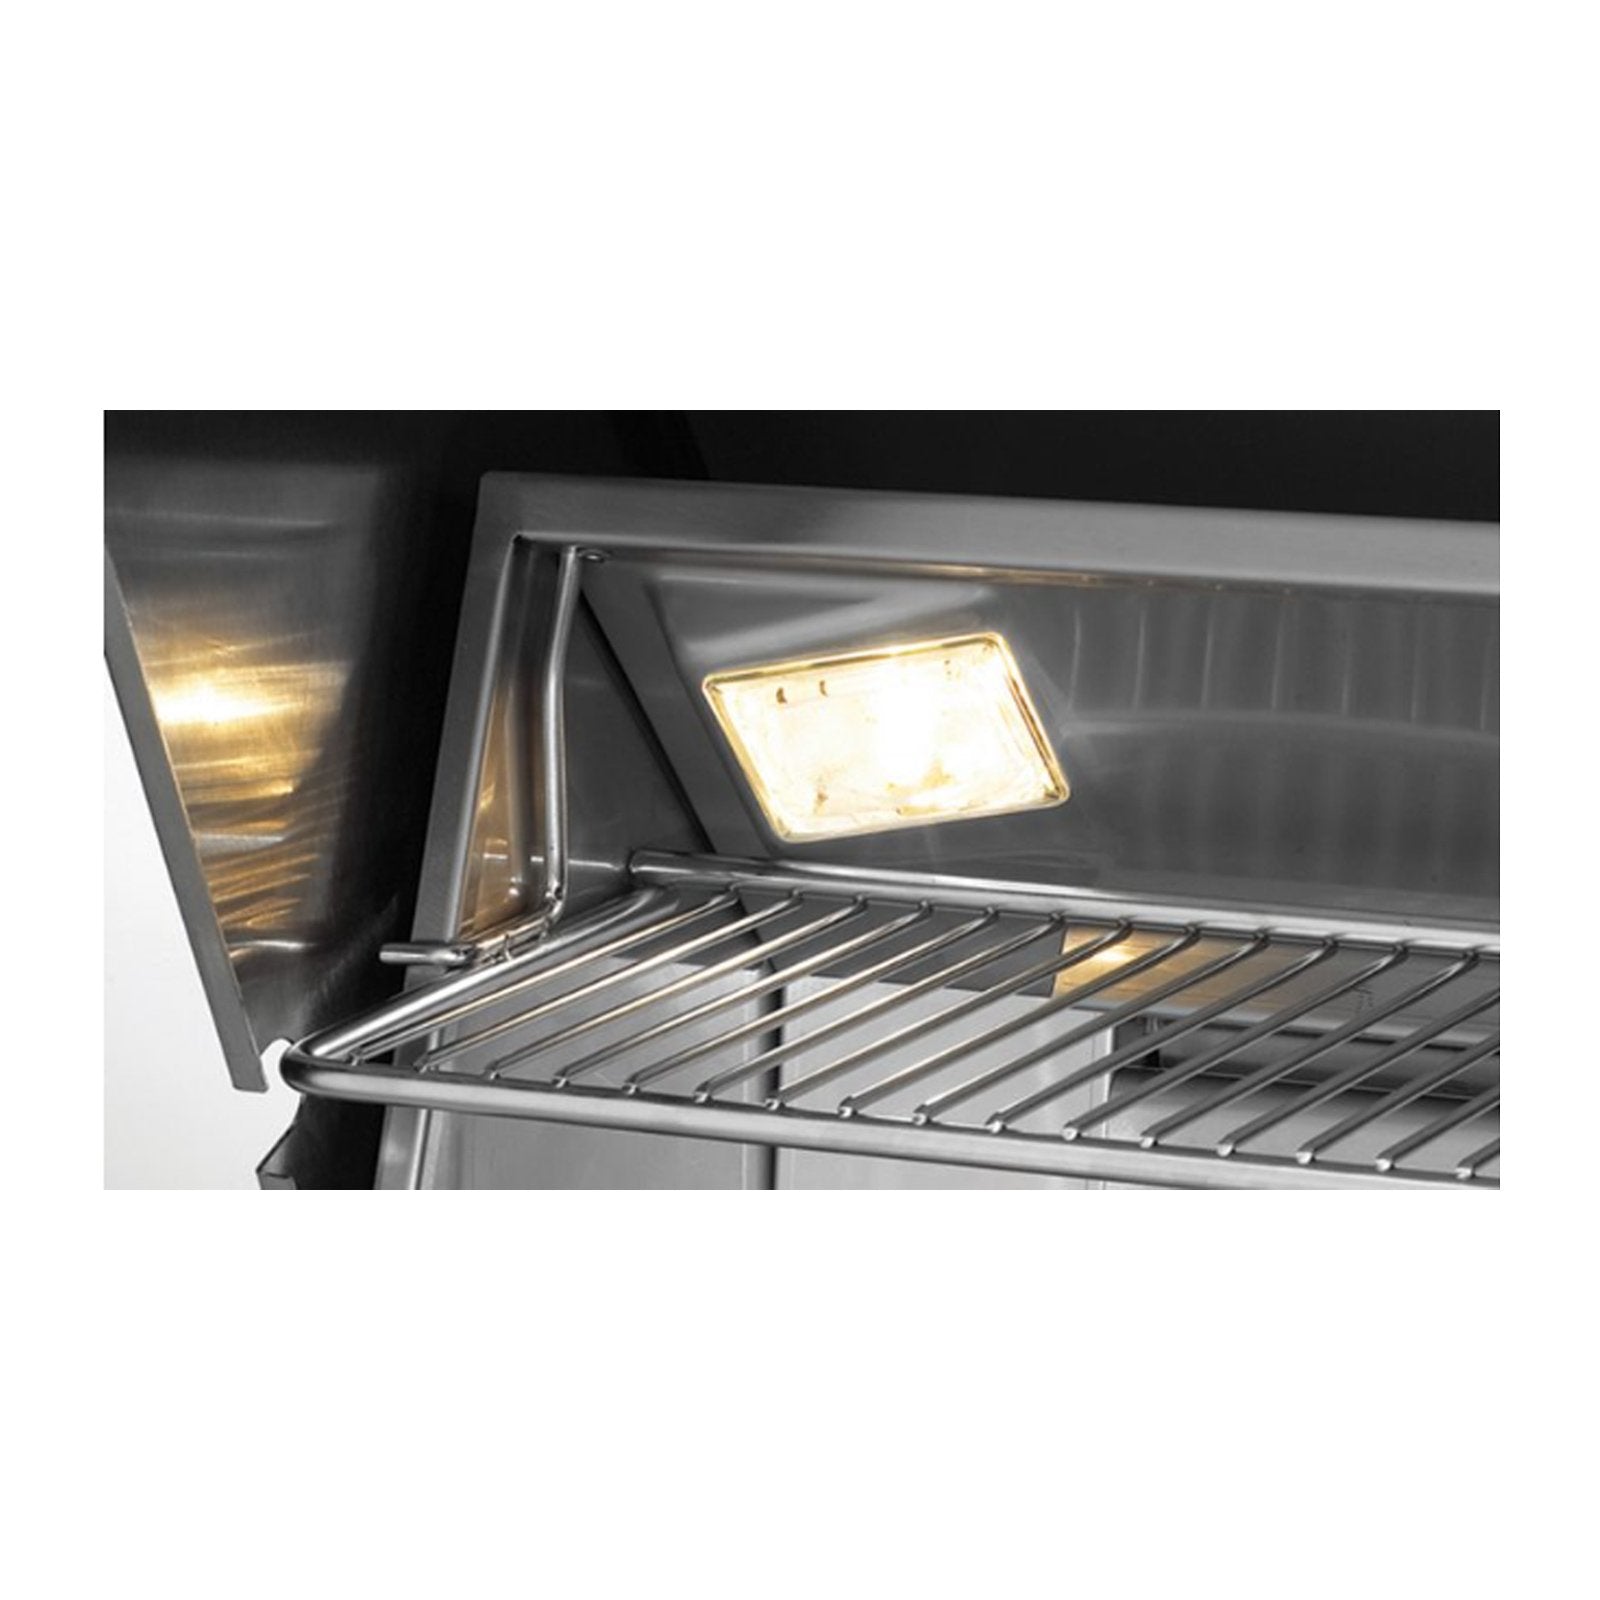 fire-magic-30-echelon-e660i-built-in-3-burner-gas-grill-w-infrared-burner-rotisserie-and-analog-thermometer 3